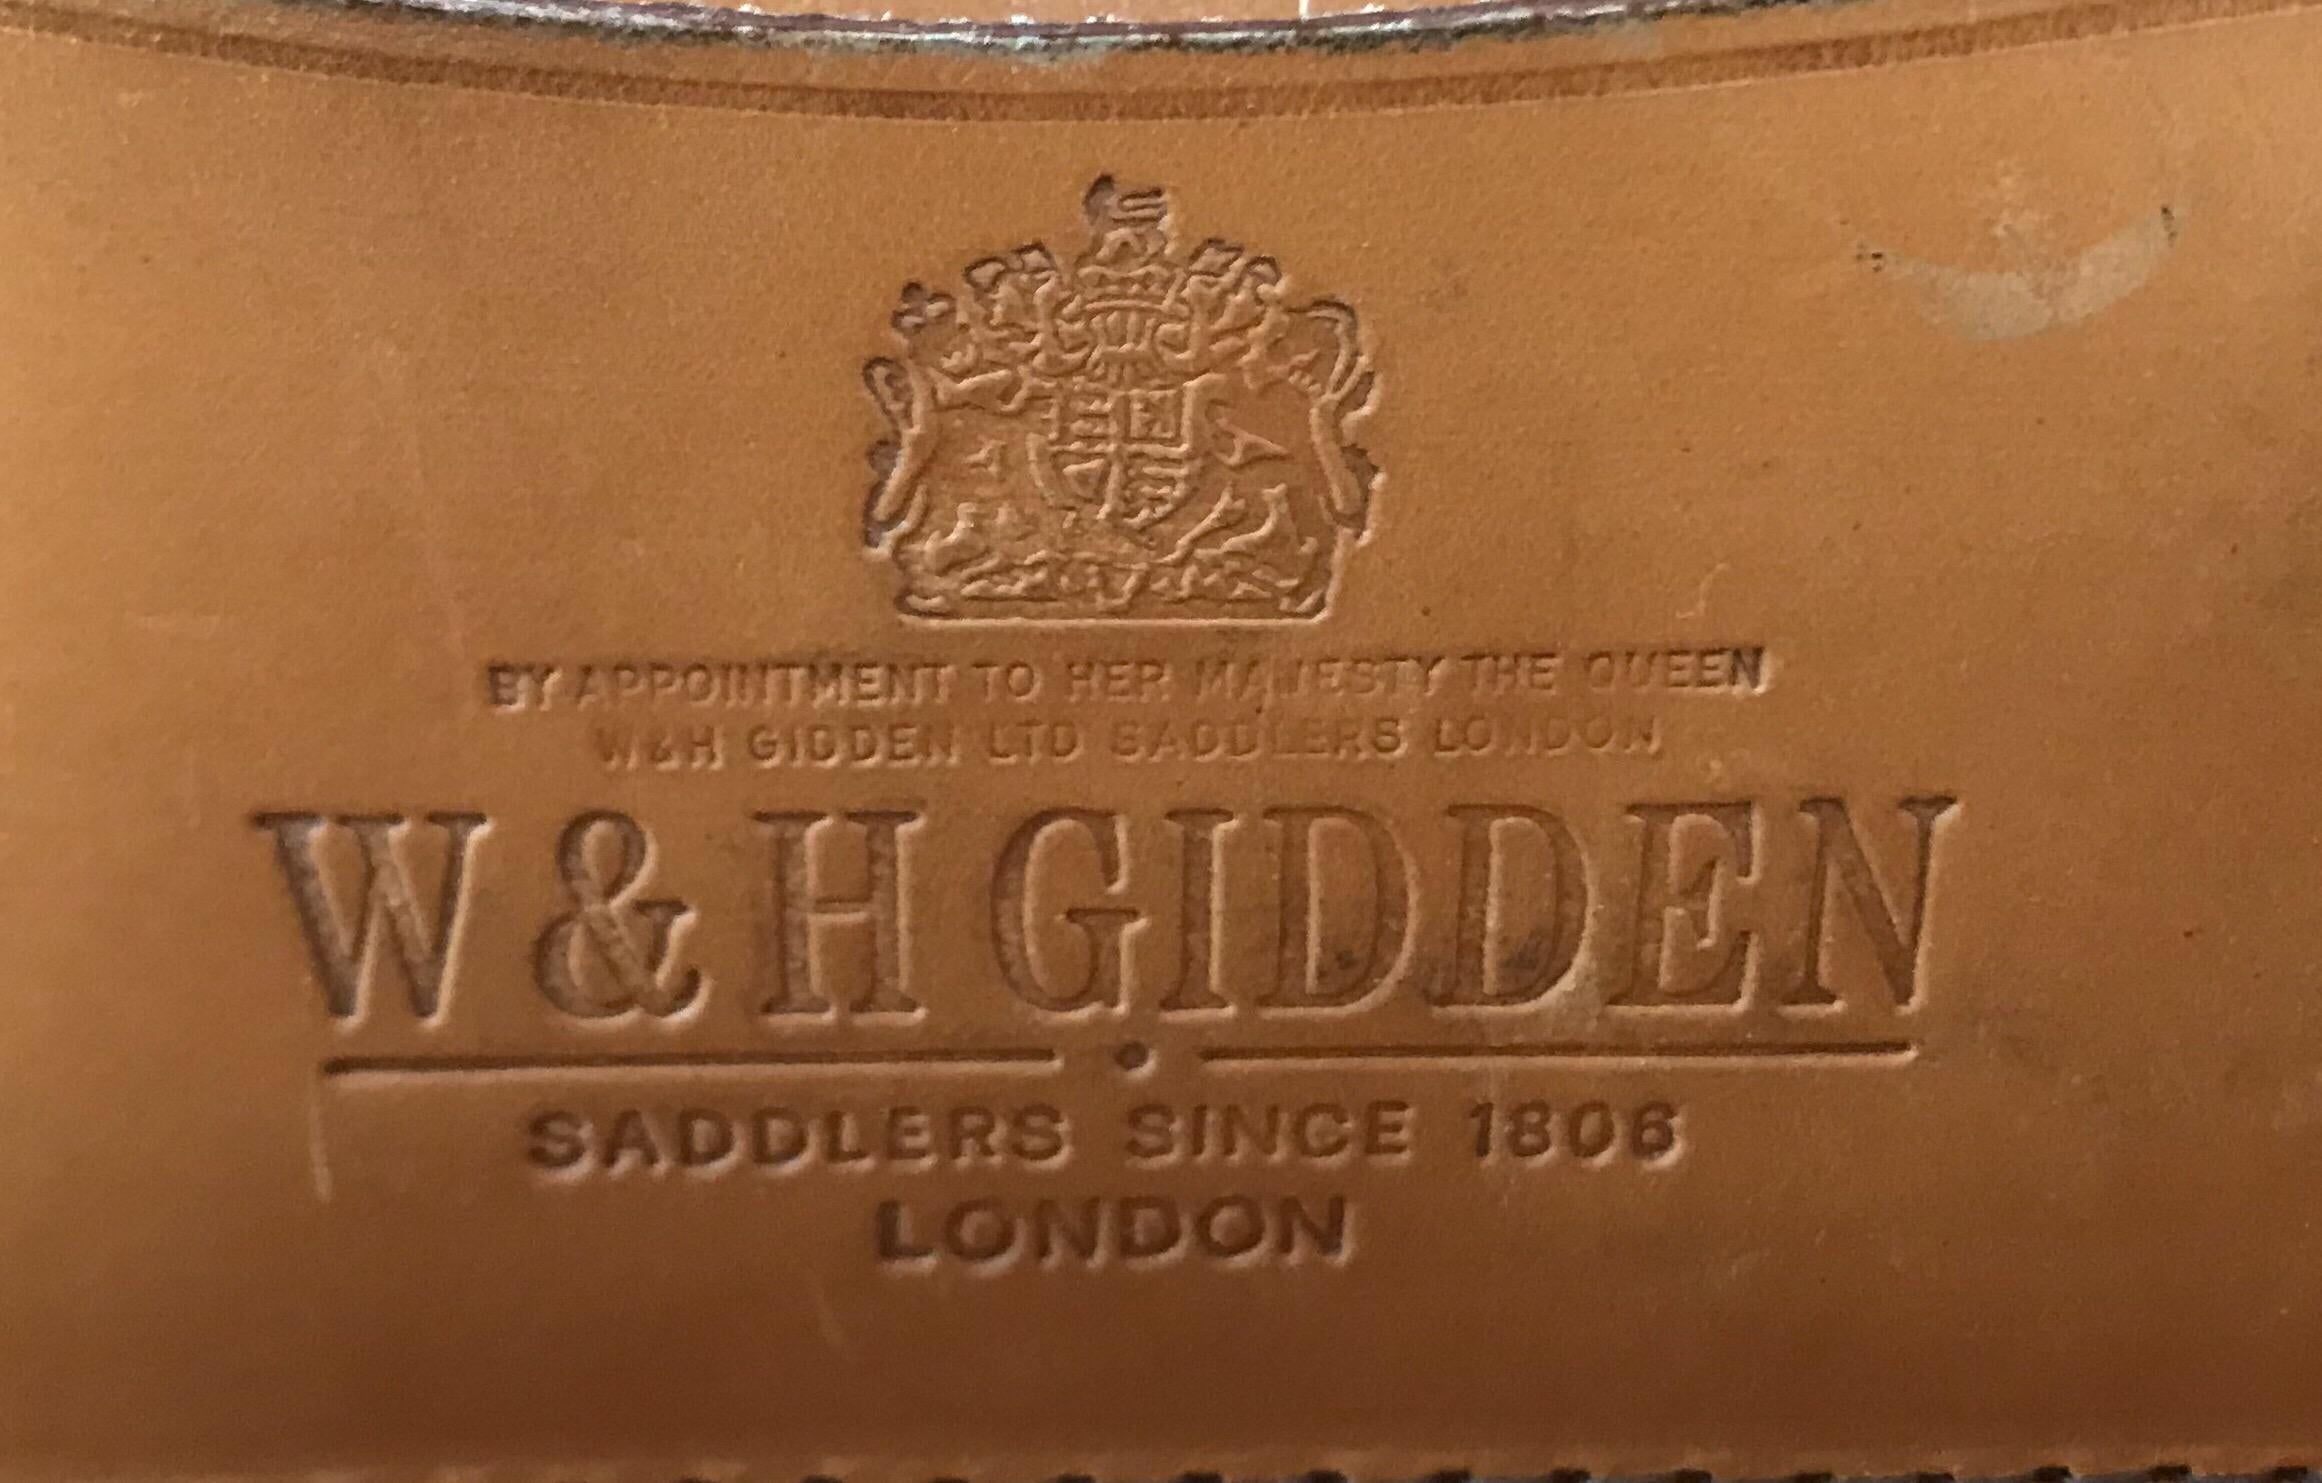 1960-1970 Hide Leather Attaché Case by “W & H Gidden” 8